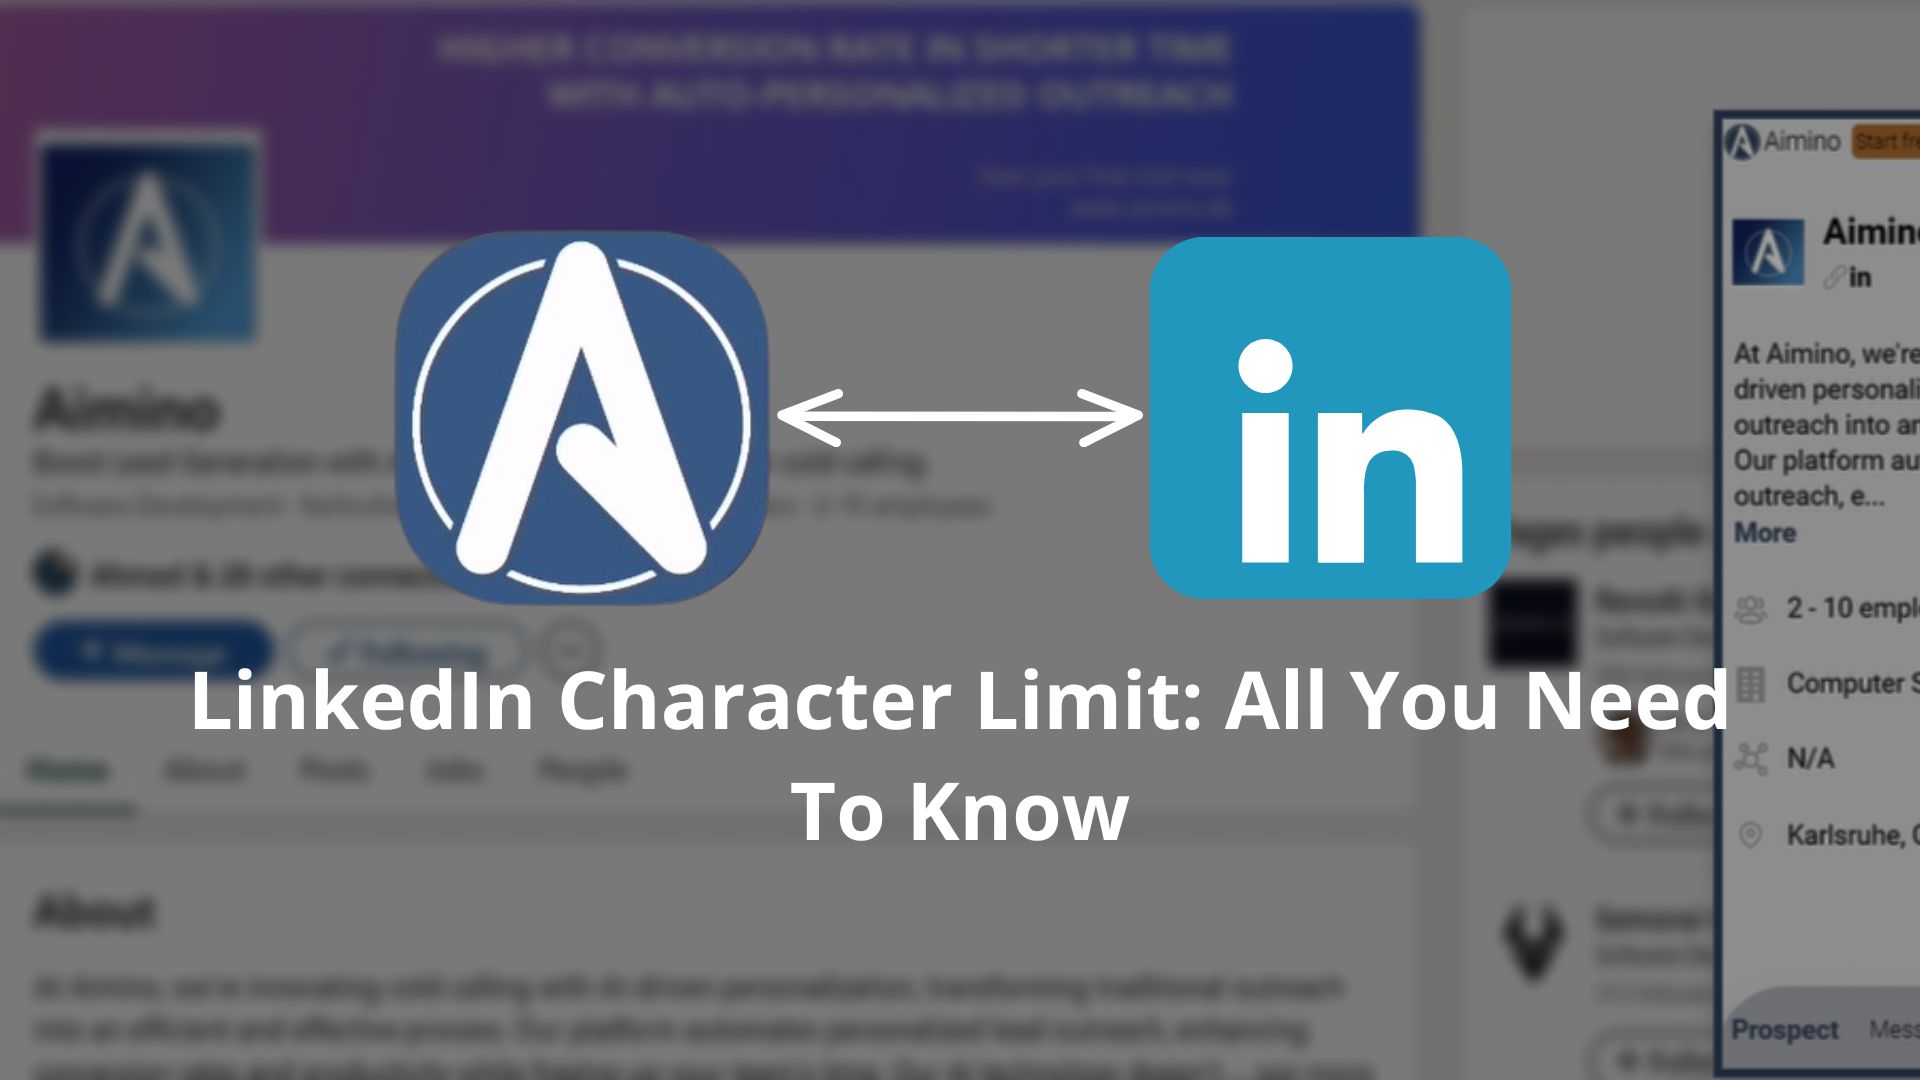 LinkedIn Character Limit: All You Need To Know